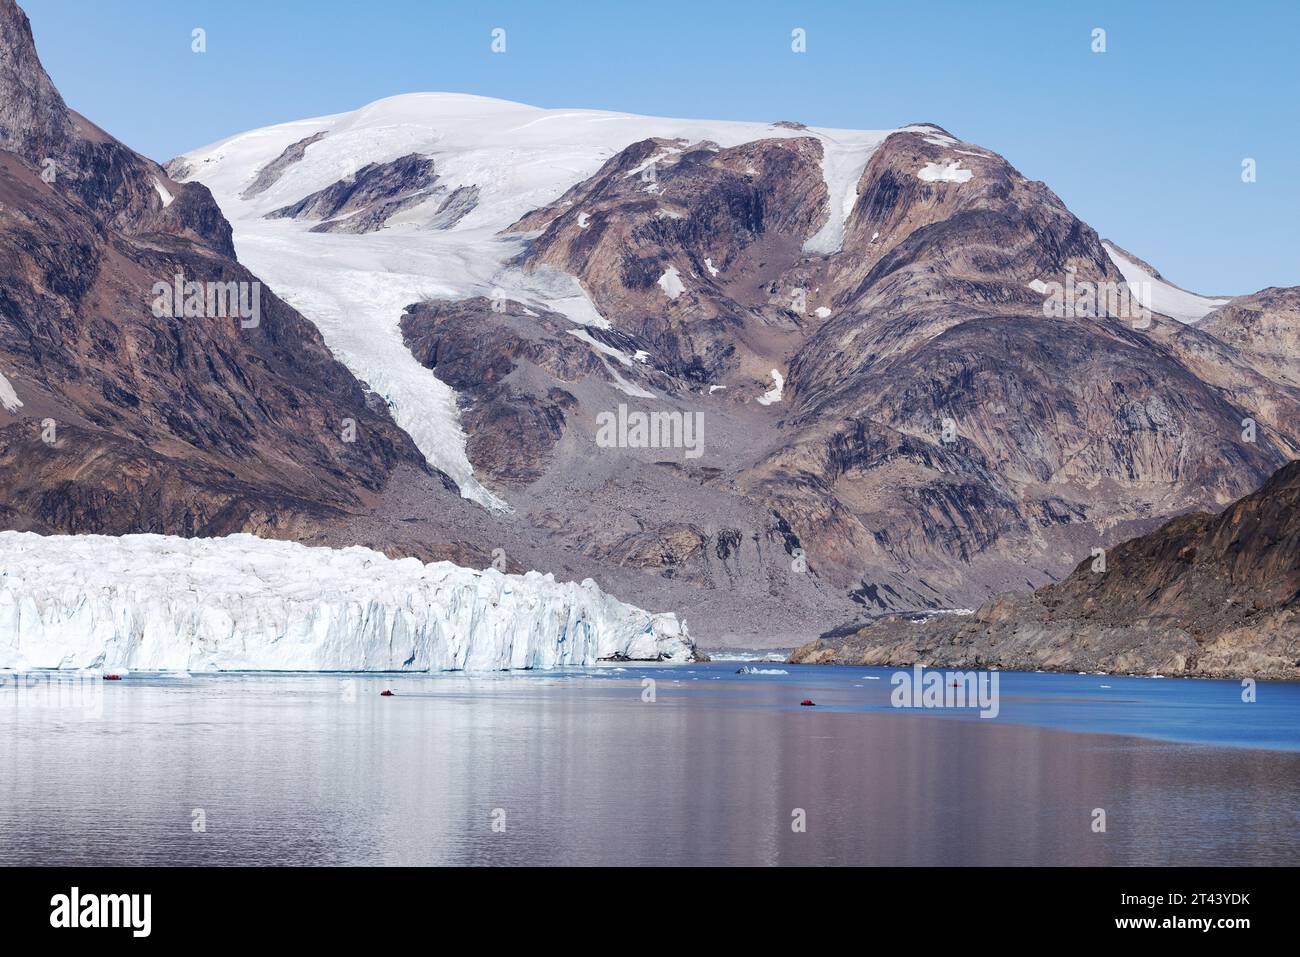 Greenland glacier; tiny tourist zodiacs seen visiting The Thrym Glacier at the end of Skjoldungen Fjord; Greenland Travel, Arctic travel. Stock Photo